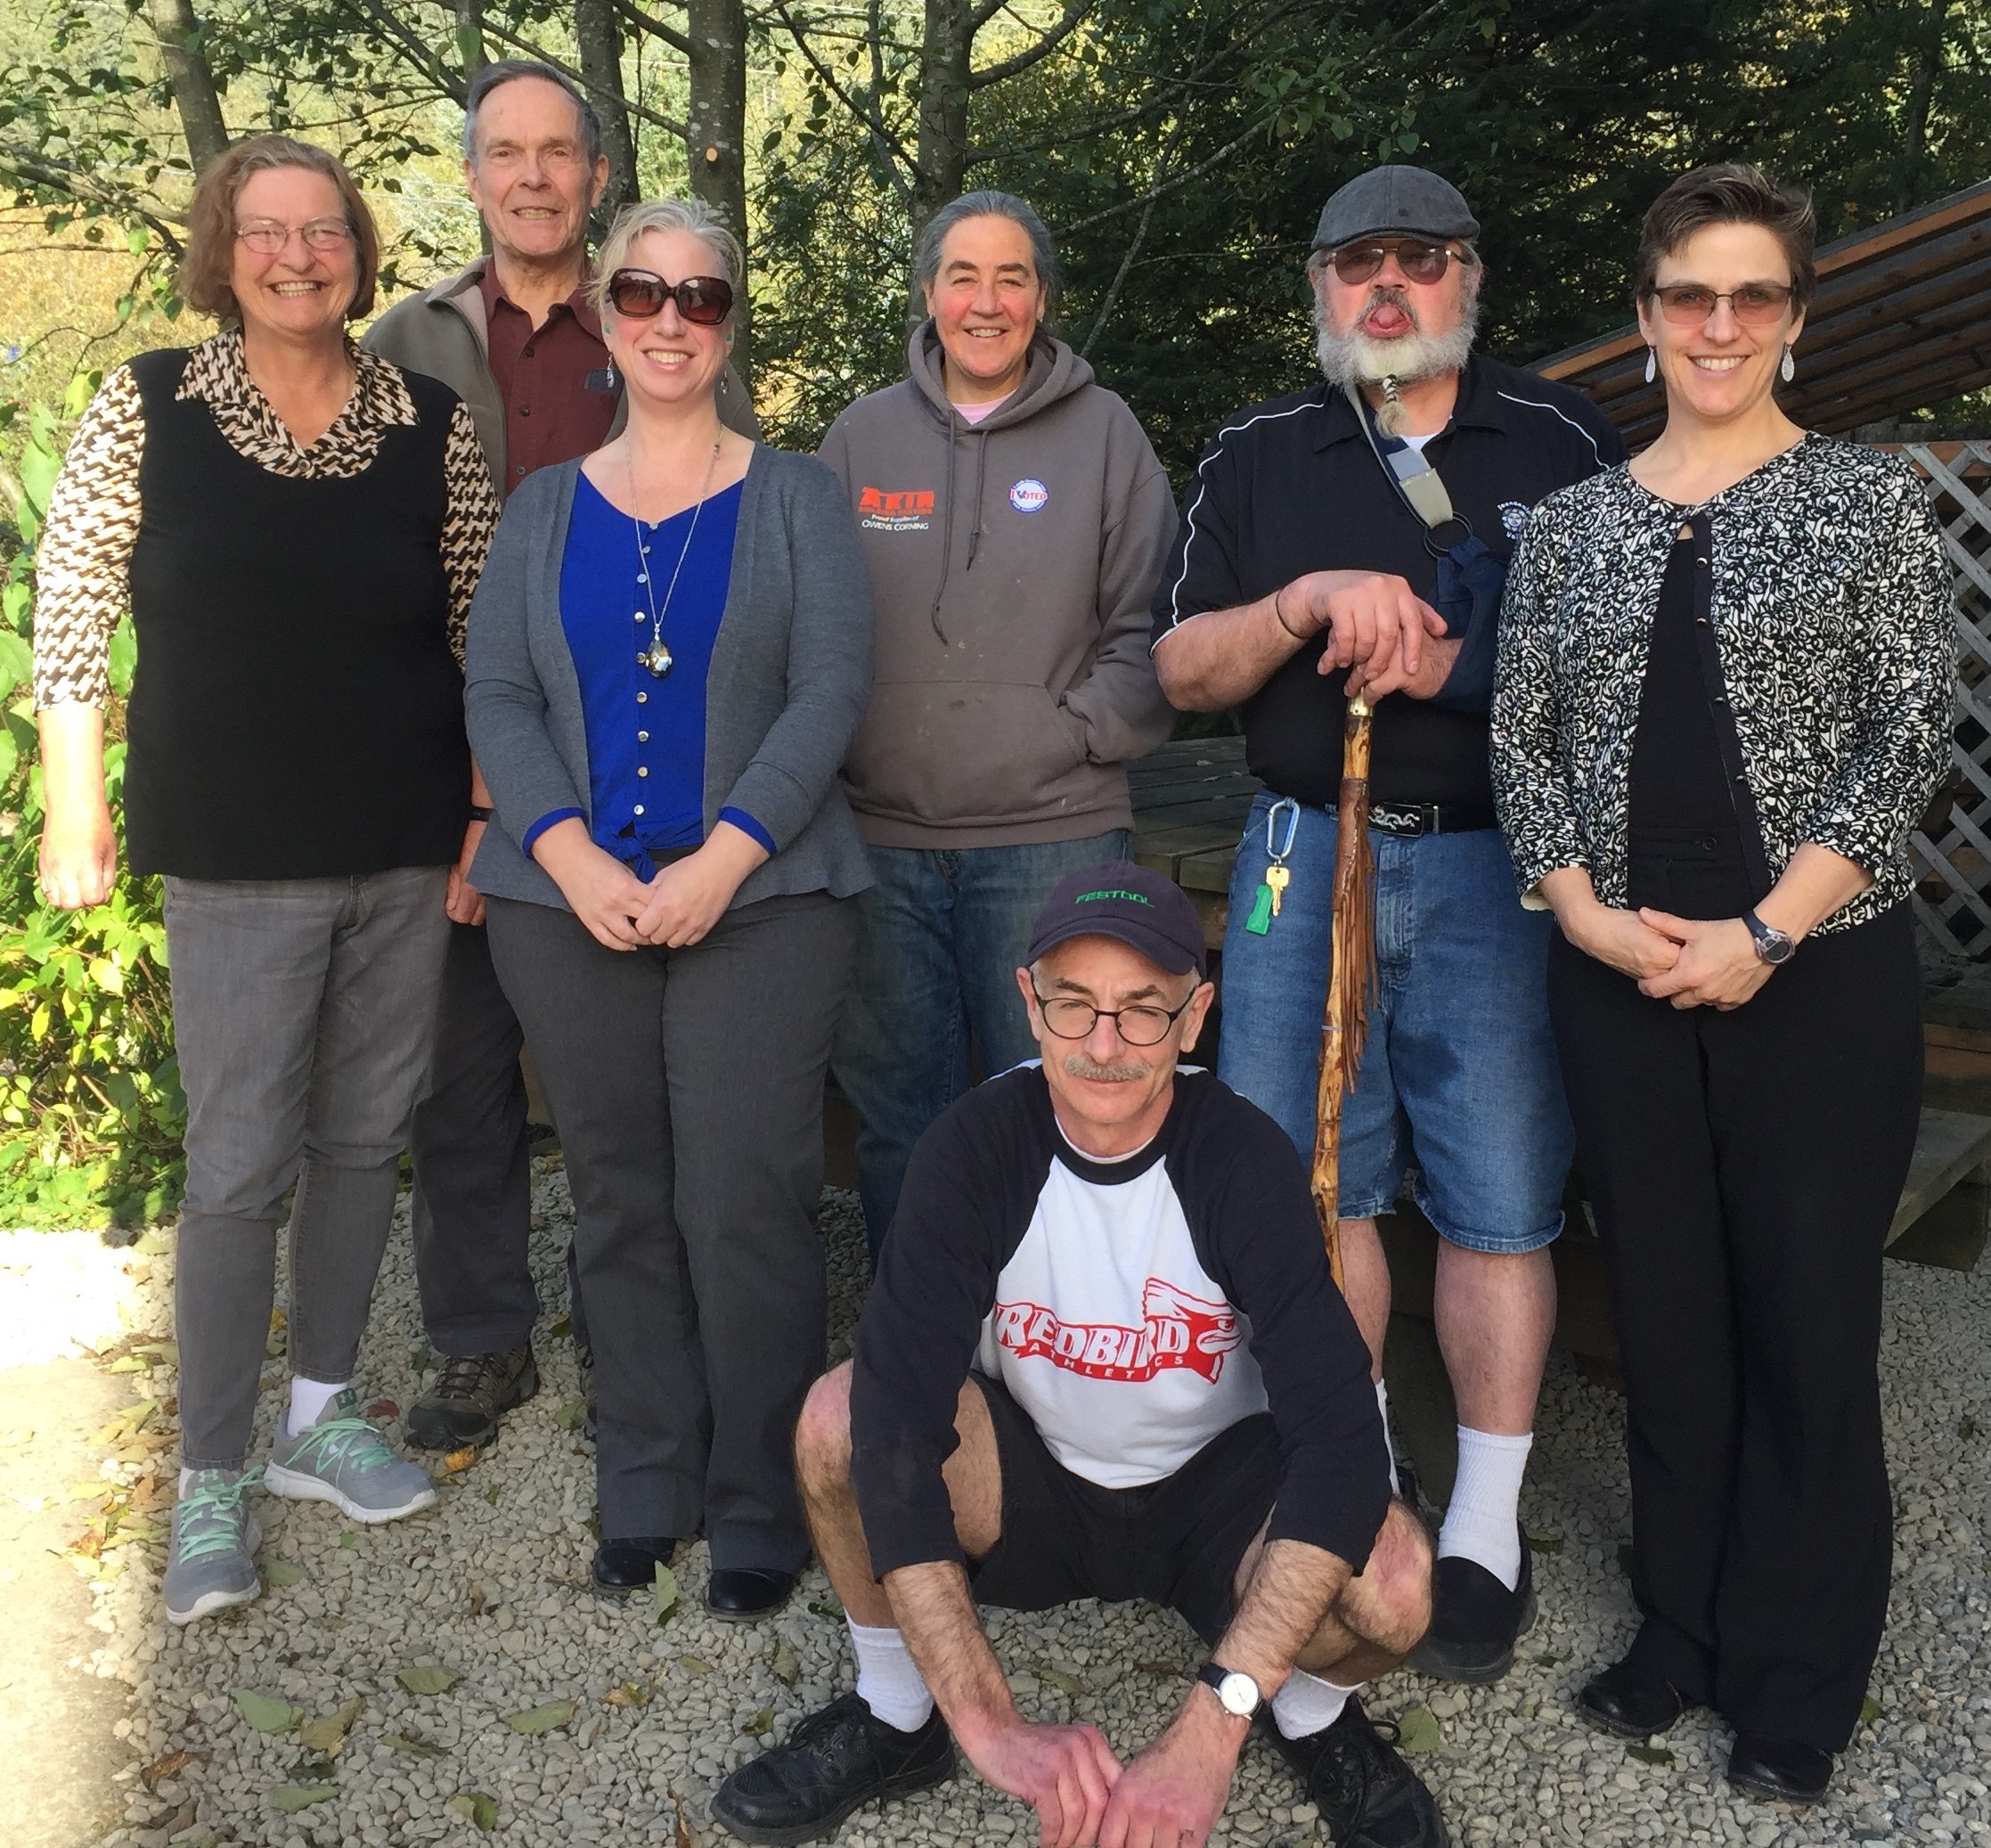 group photo of the juneau peer support group outdoors on a sunny day